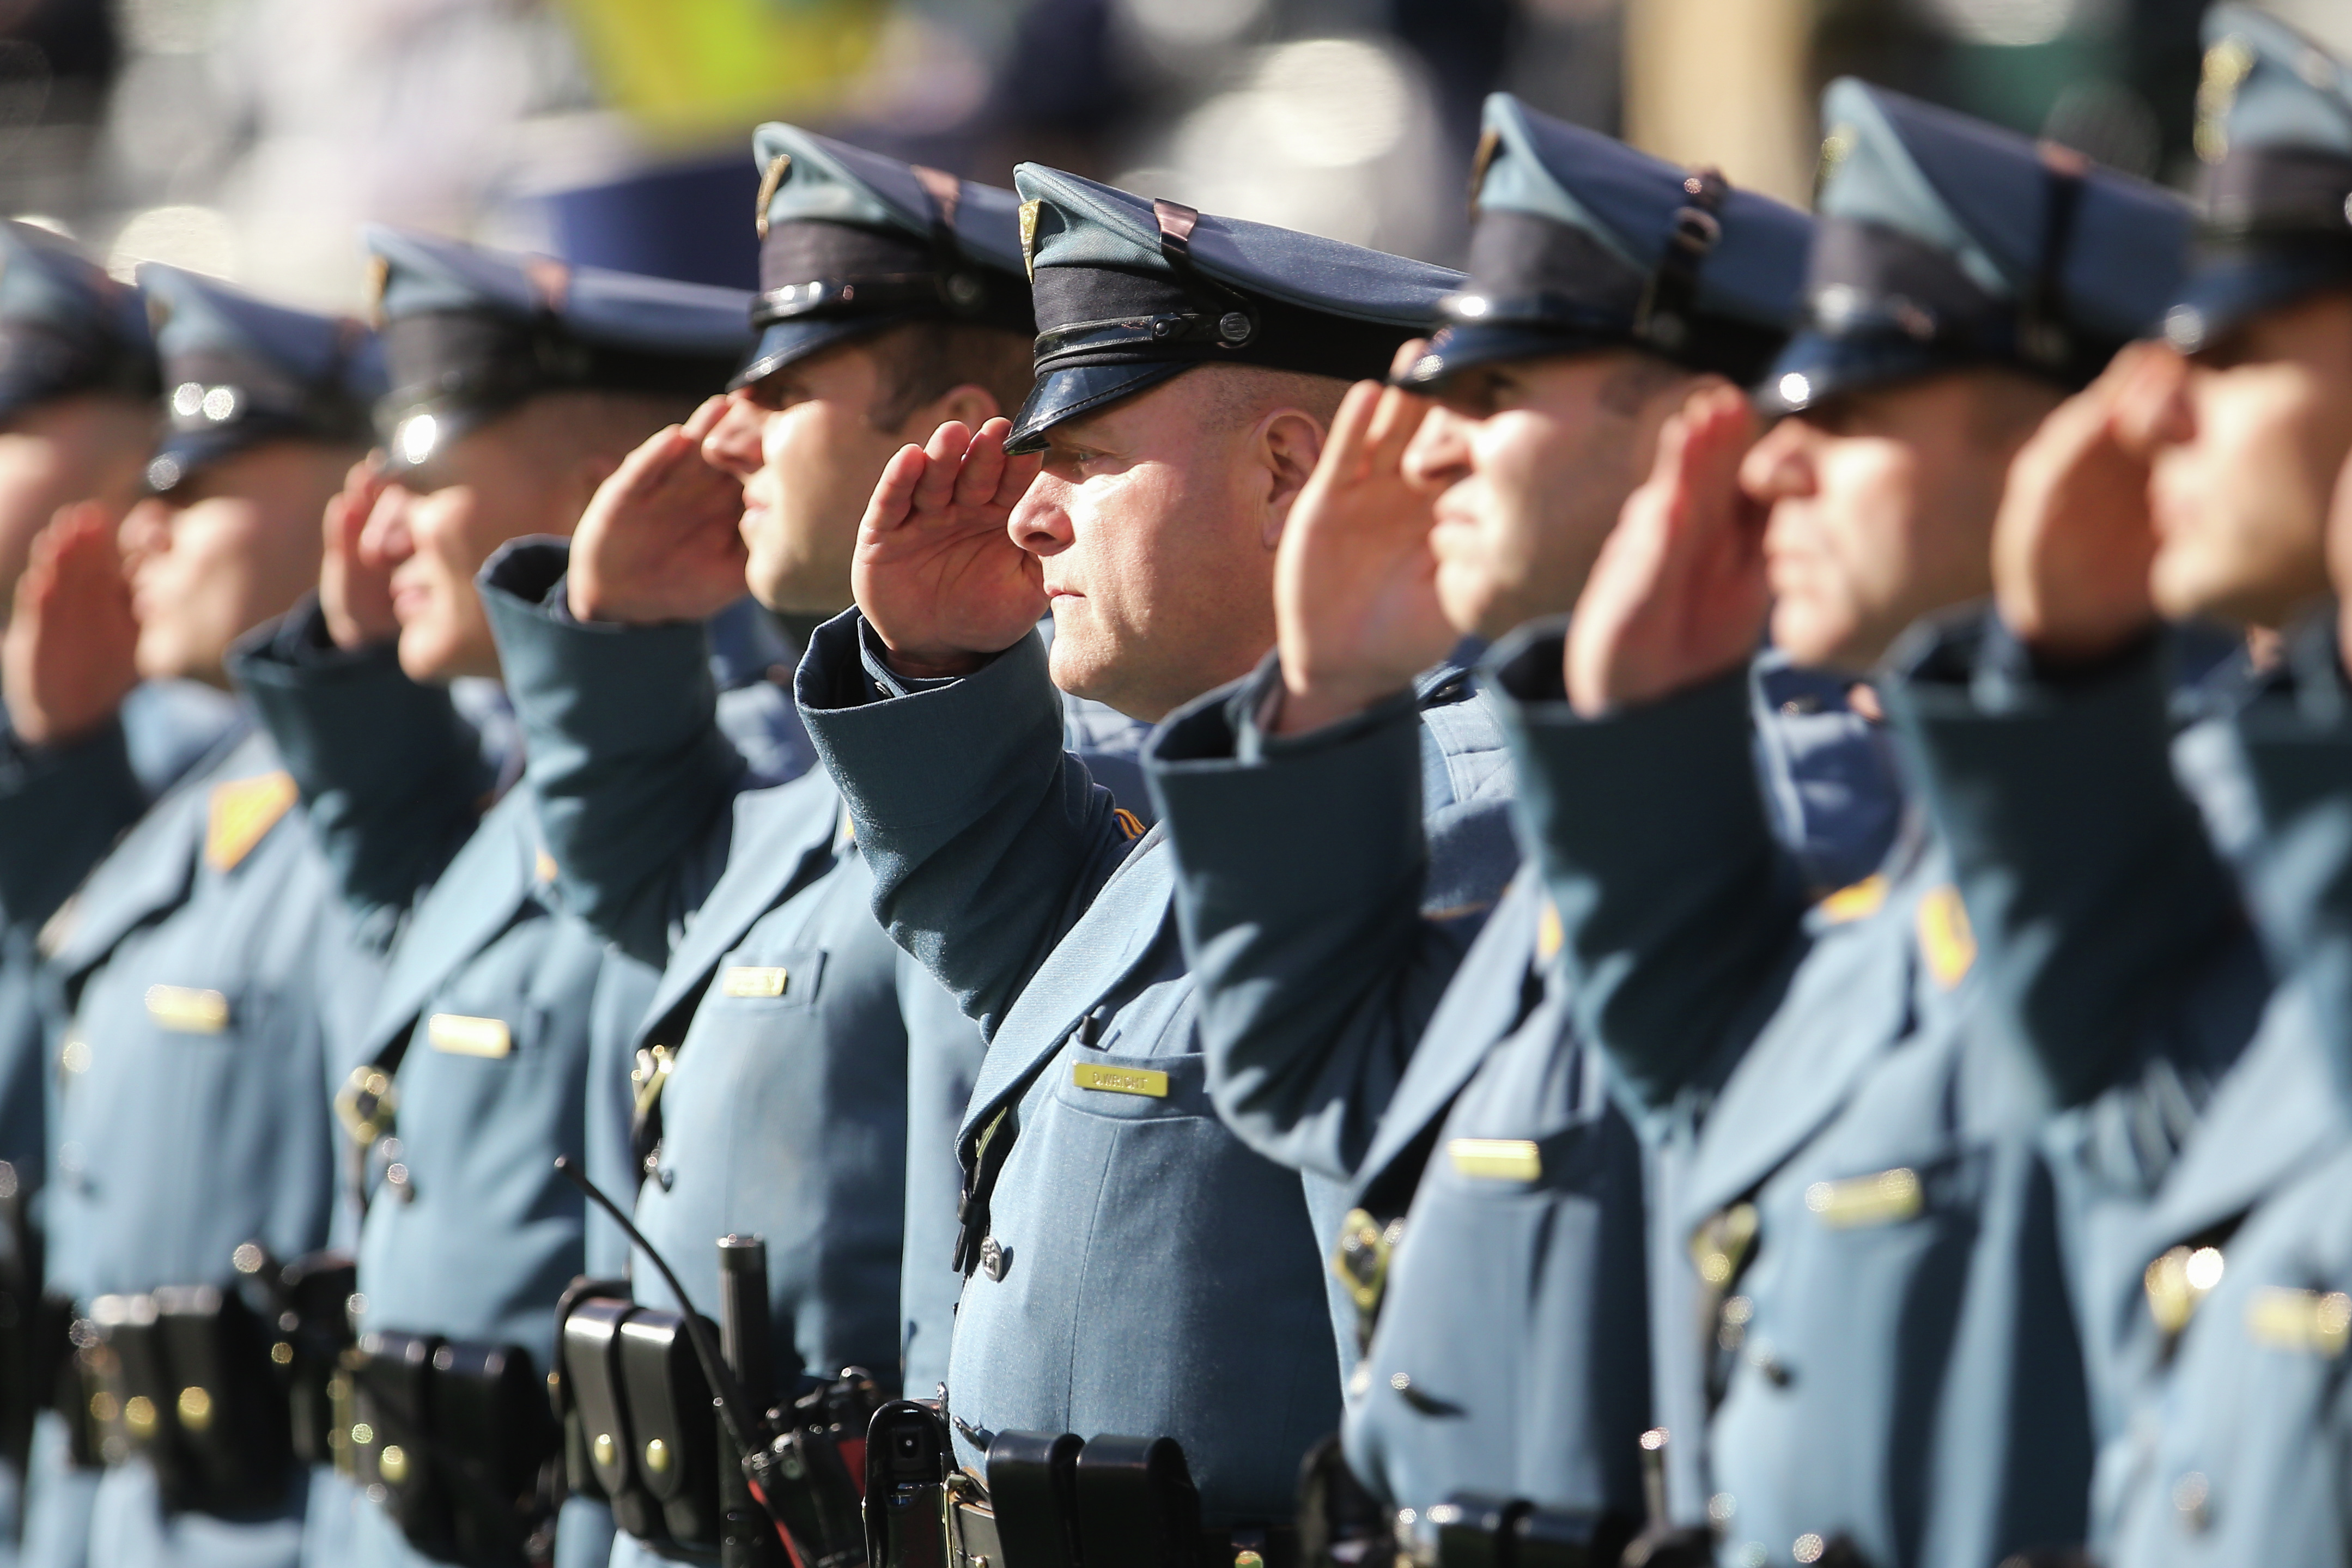 Report finds New Jersey State Police profiled, discriminated against drivers of color